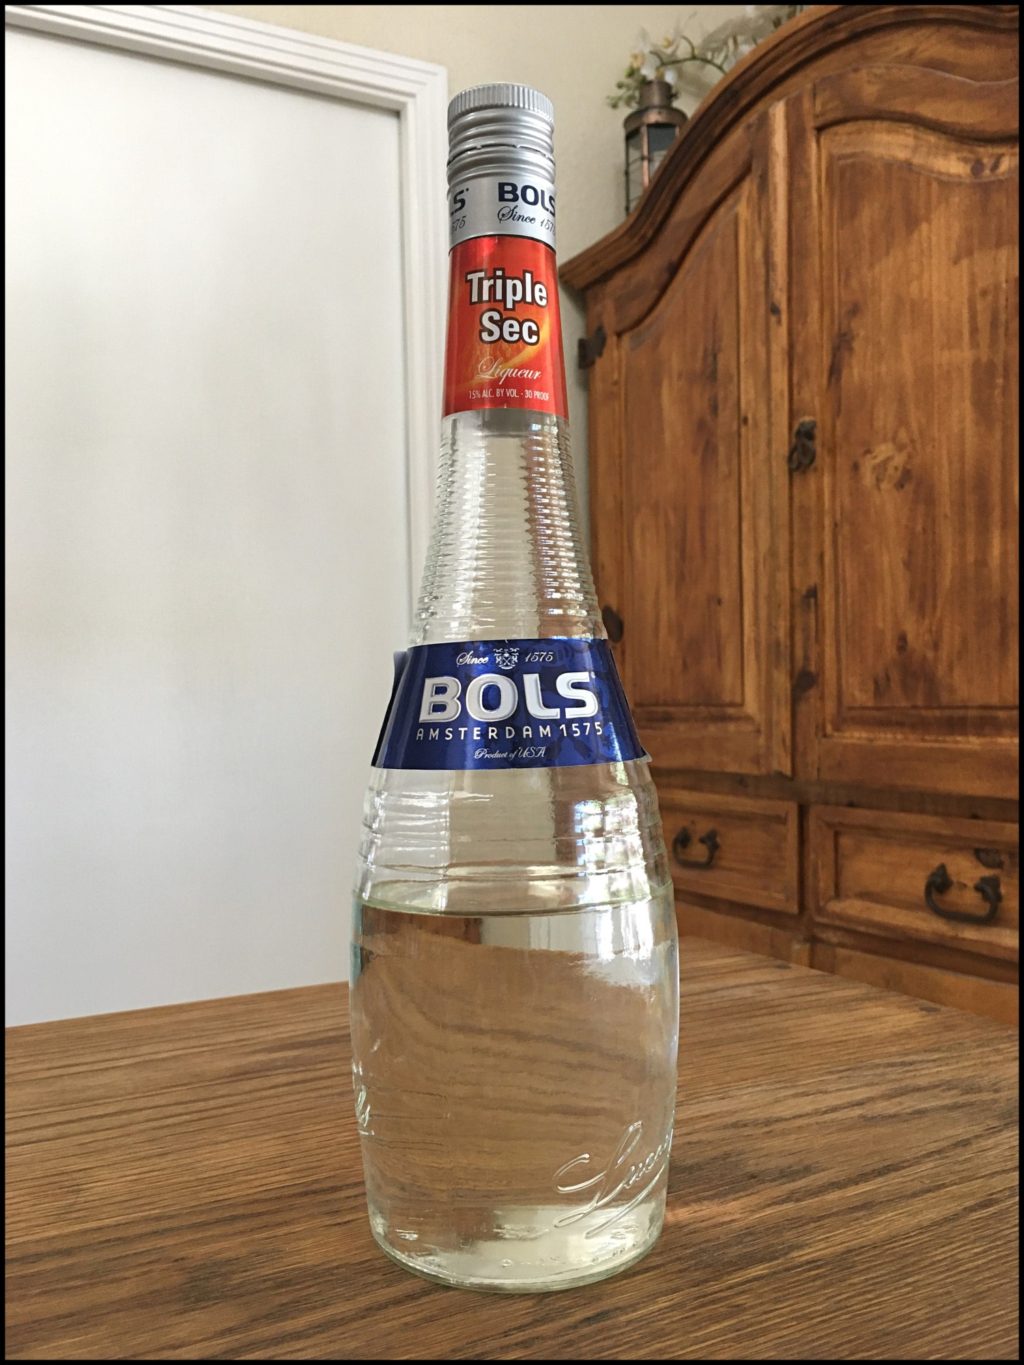 Bottle of Bols Triple Sec sitting on a wooden table, in front of a mixed white and wooden background